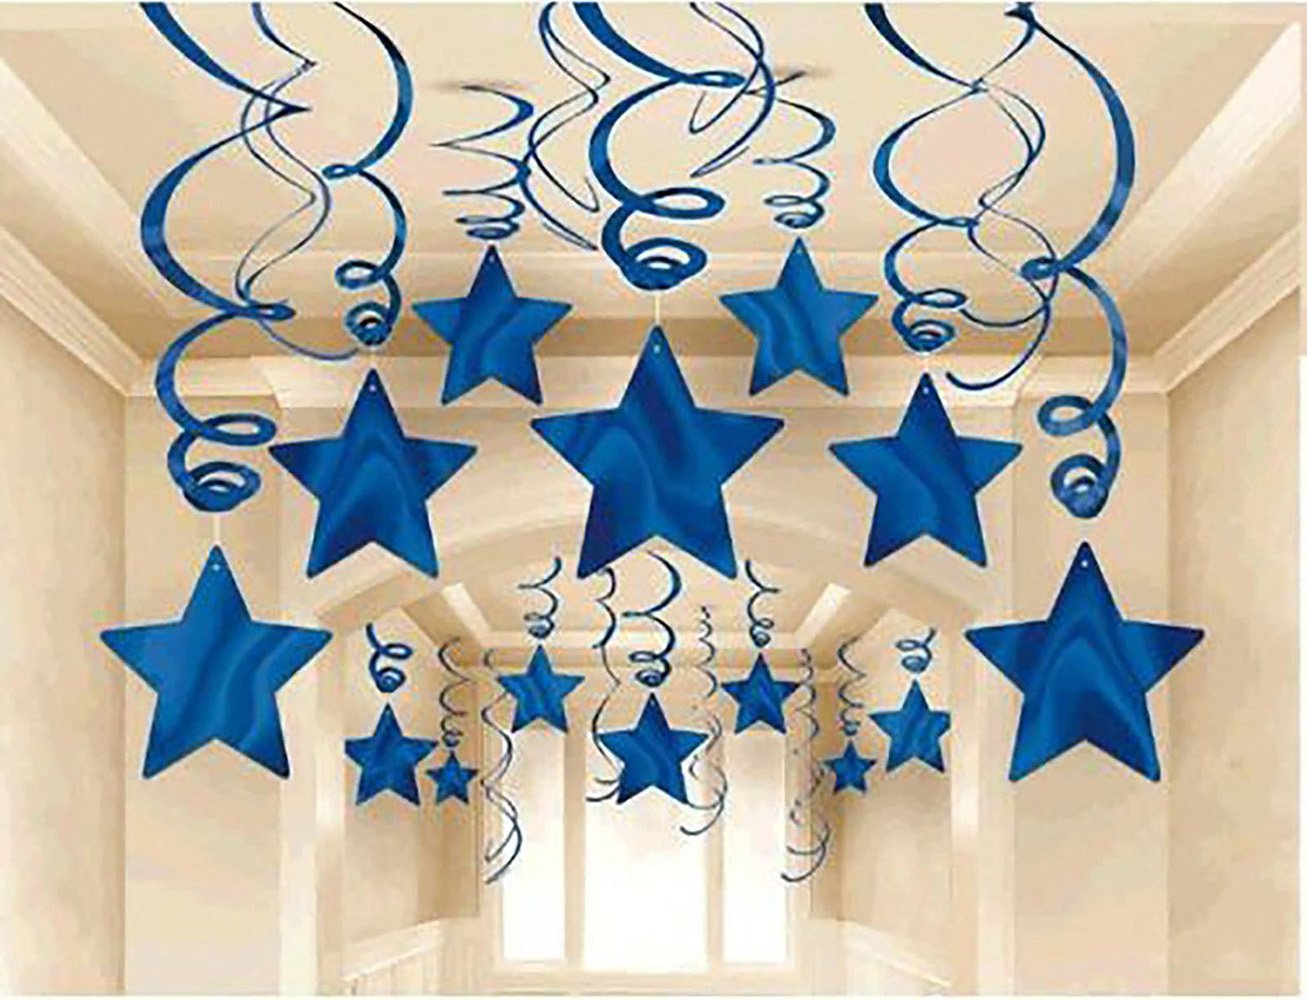 AimtoHome Party Swirl Decorations, Hanging Swirl for Ceiling Decorations, Blue with Star, Pack of 30